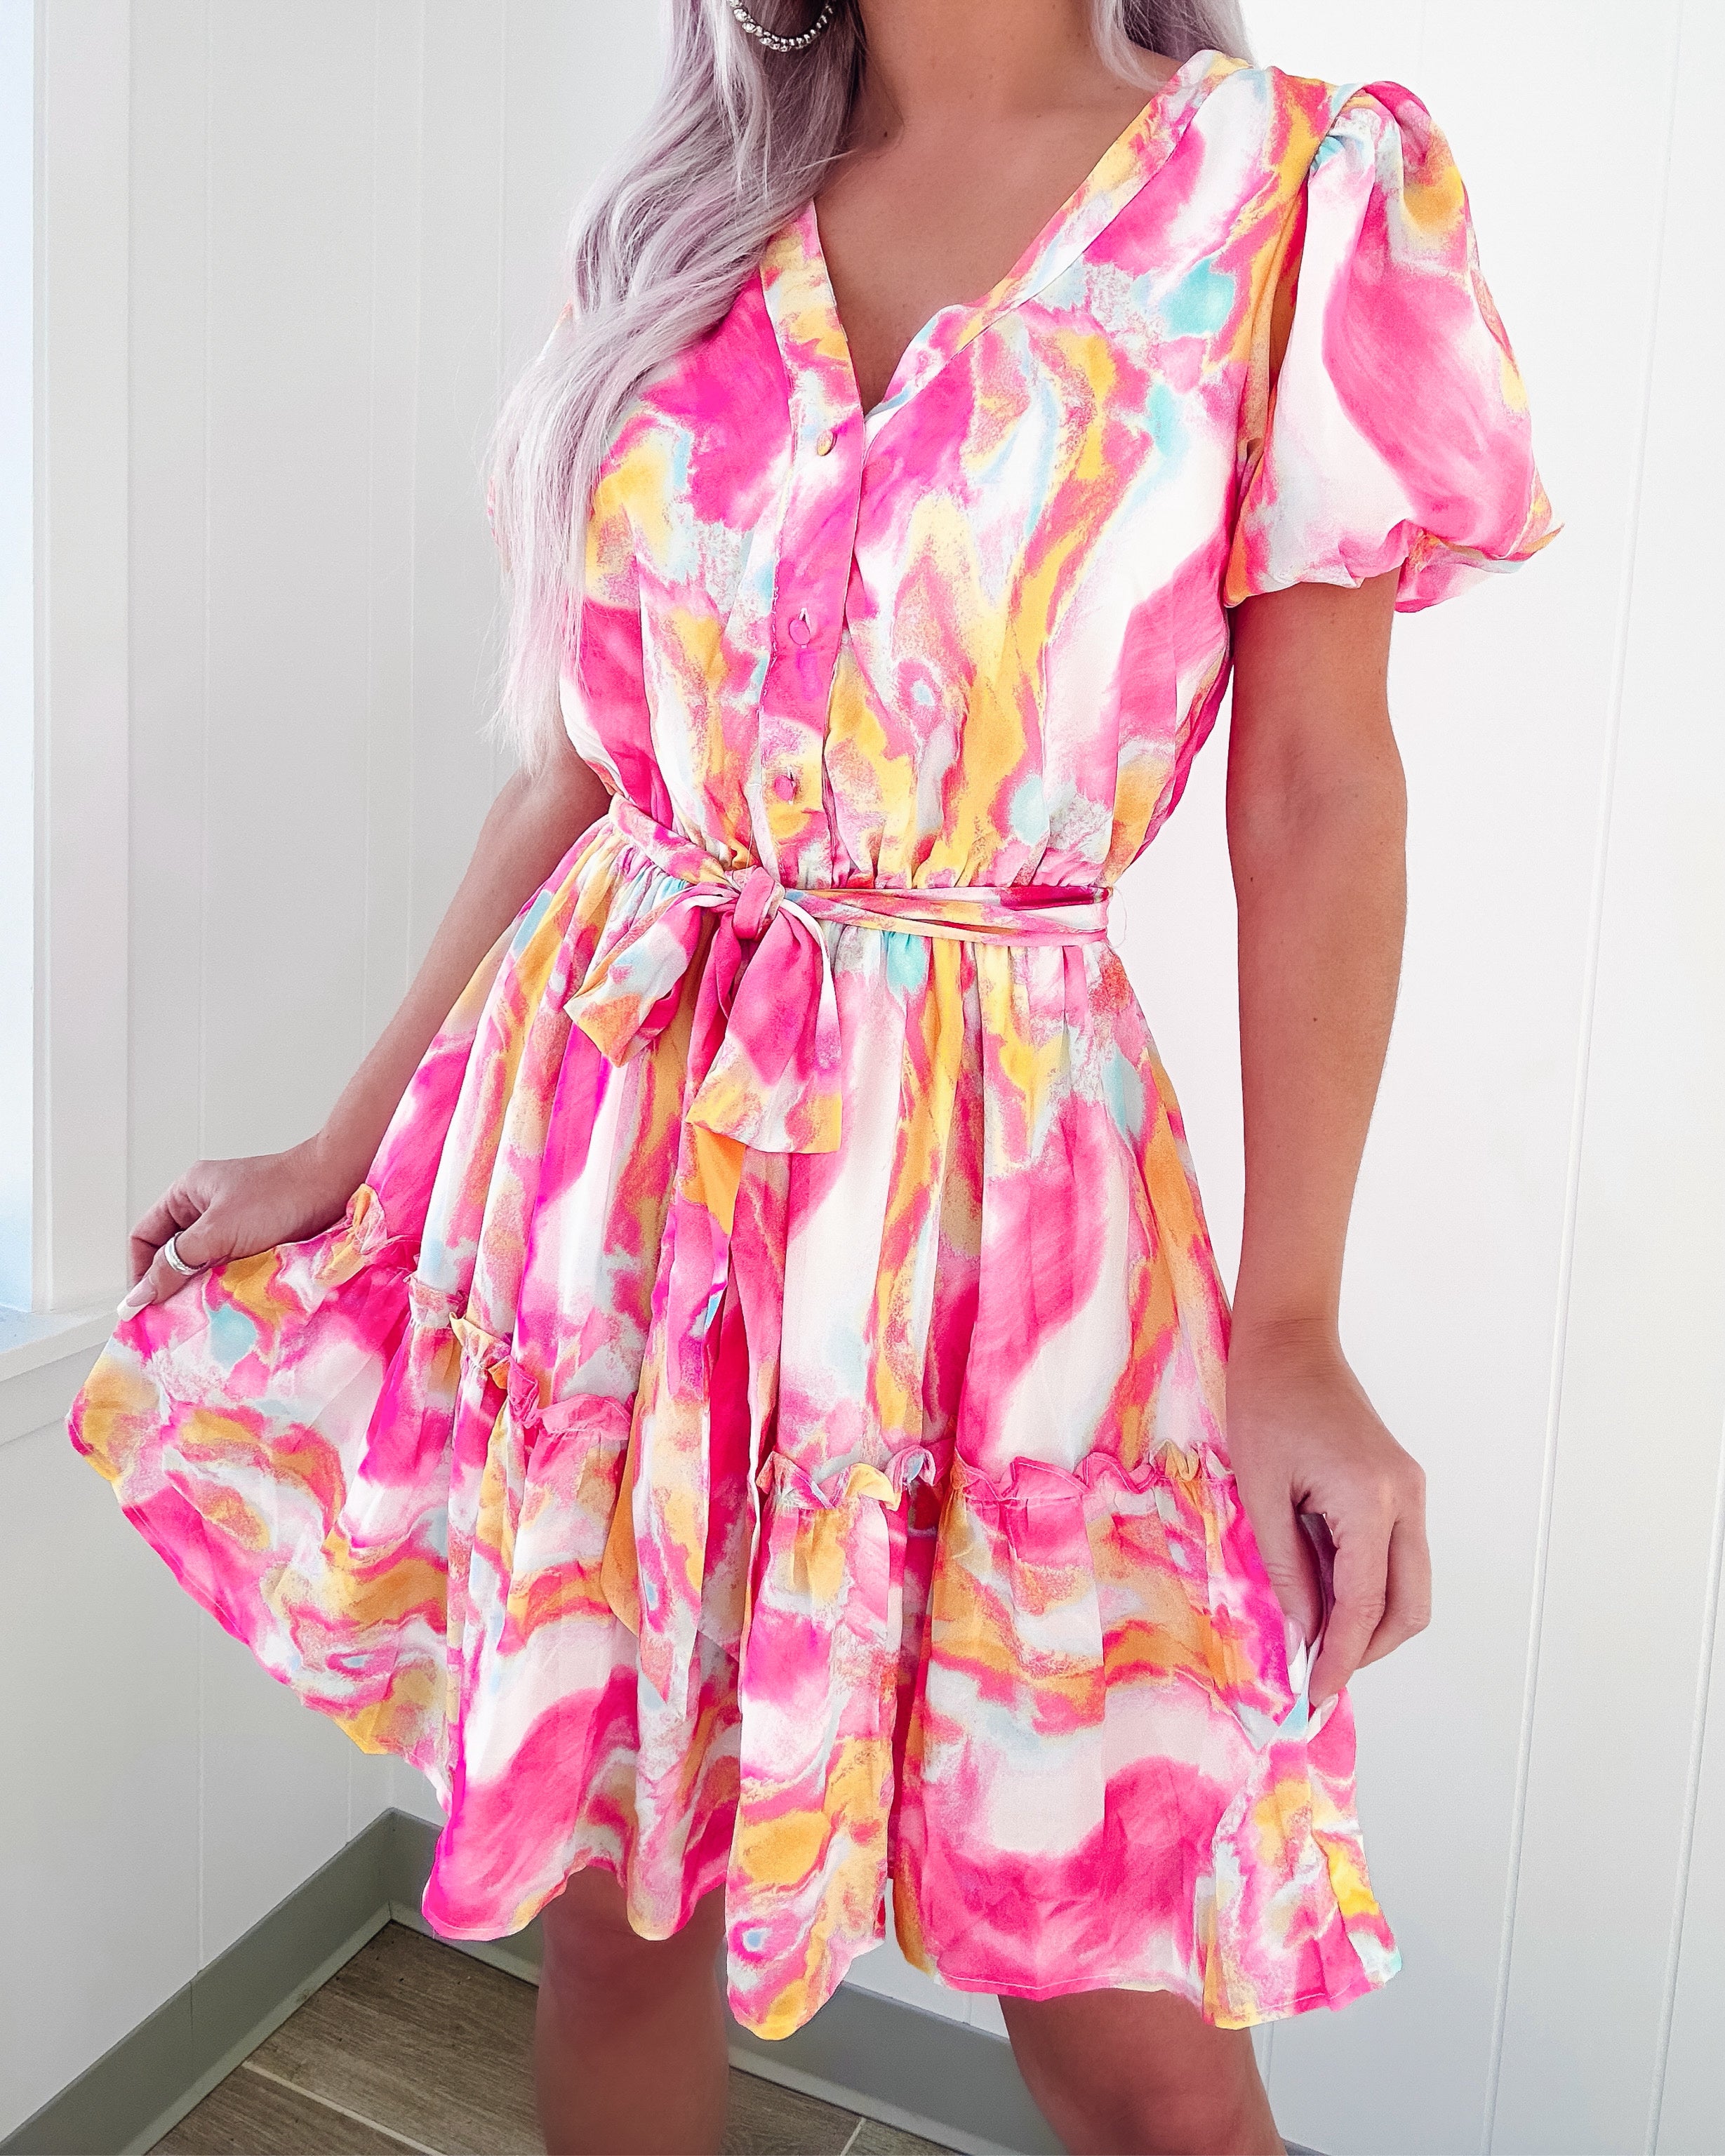 Stay Radiant Puff Sleeve Dress - Pink/Yellow